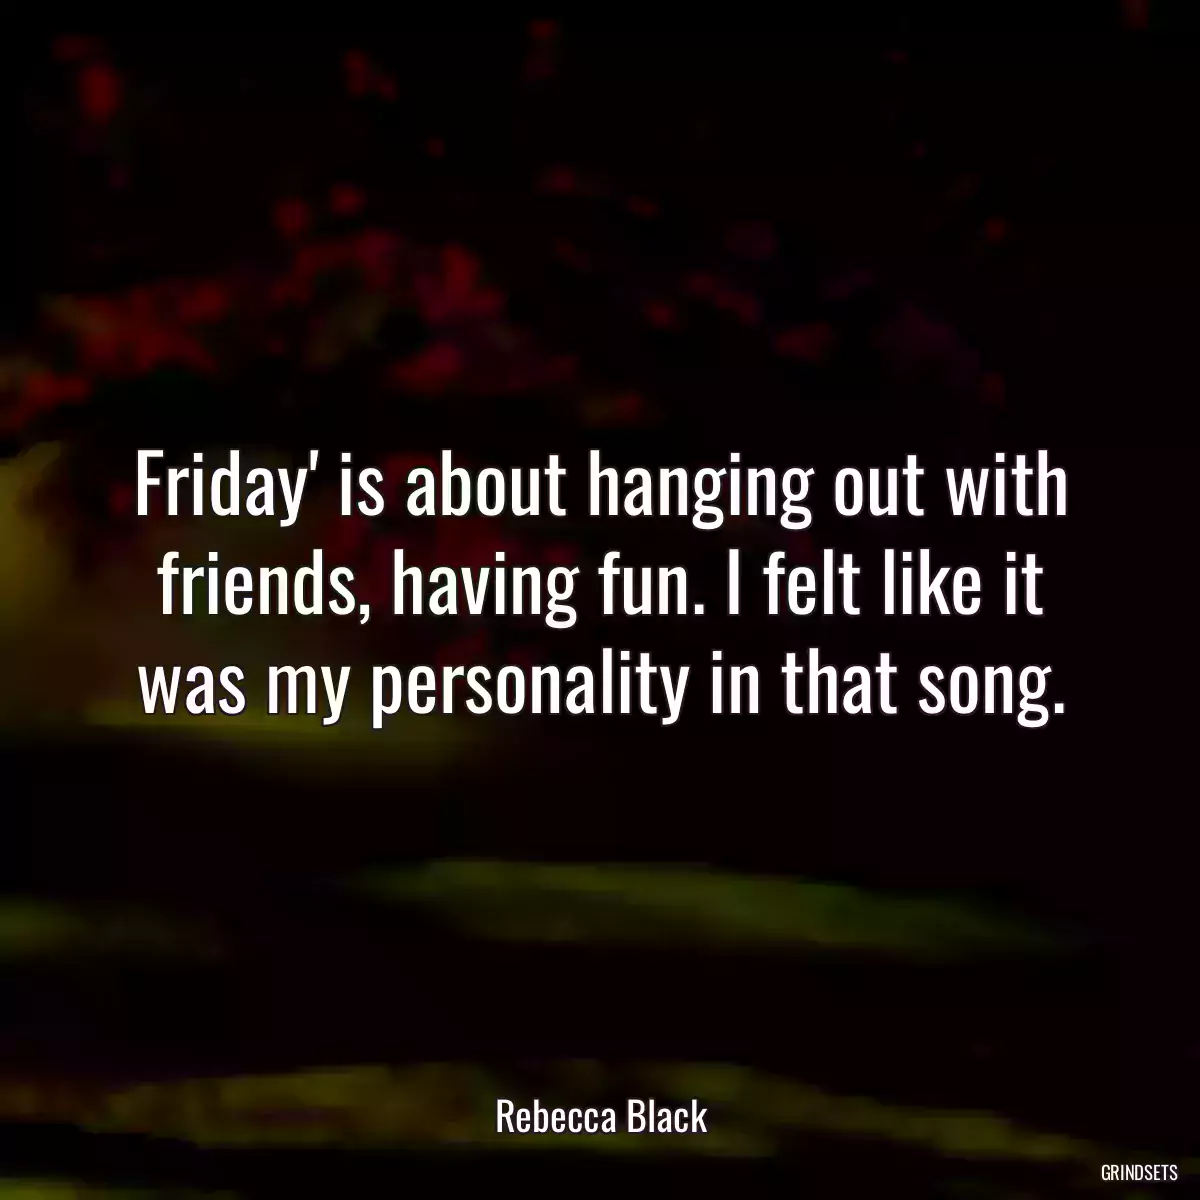 Friday\' is about hanging out with friends, having fun. I felt like it was my personality in that song.